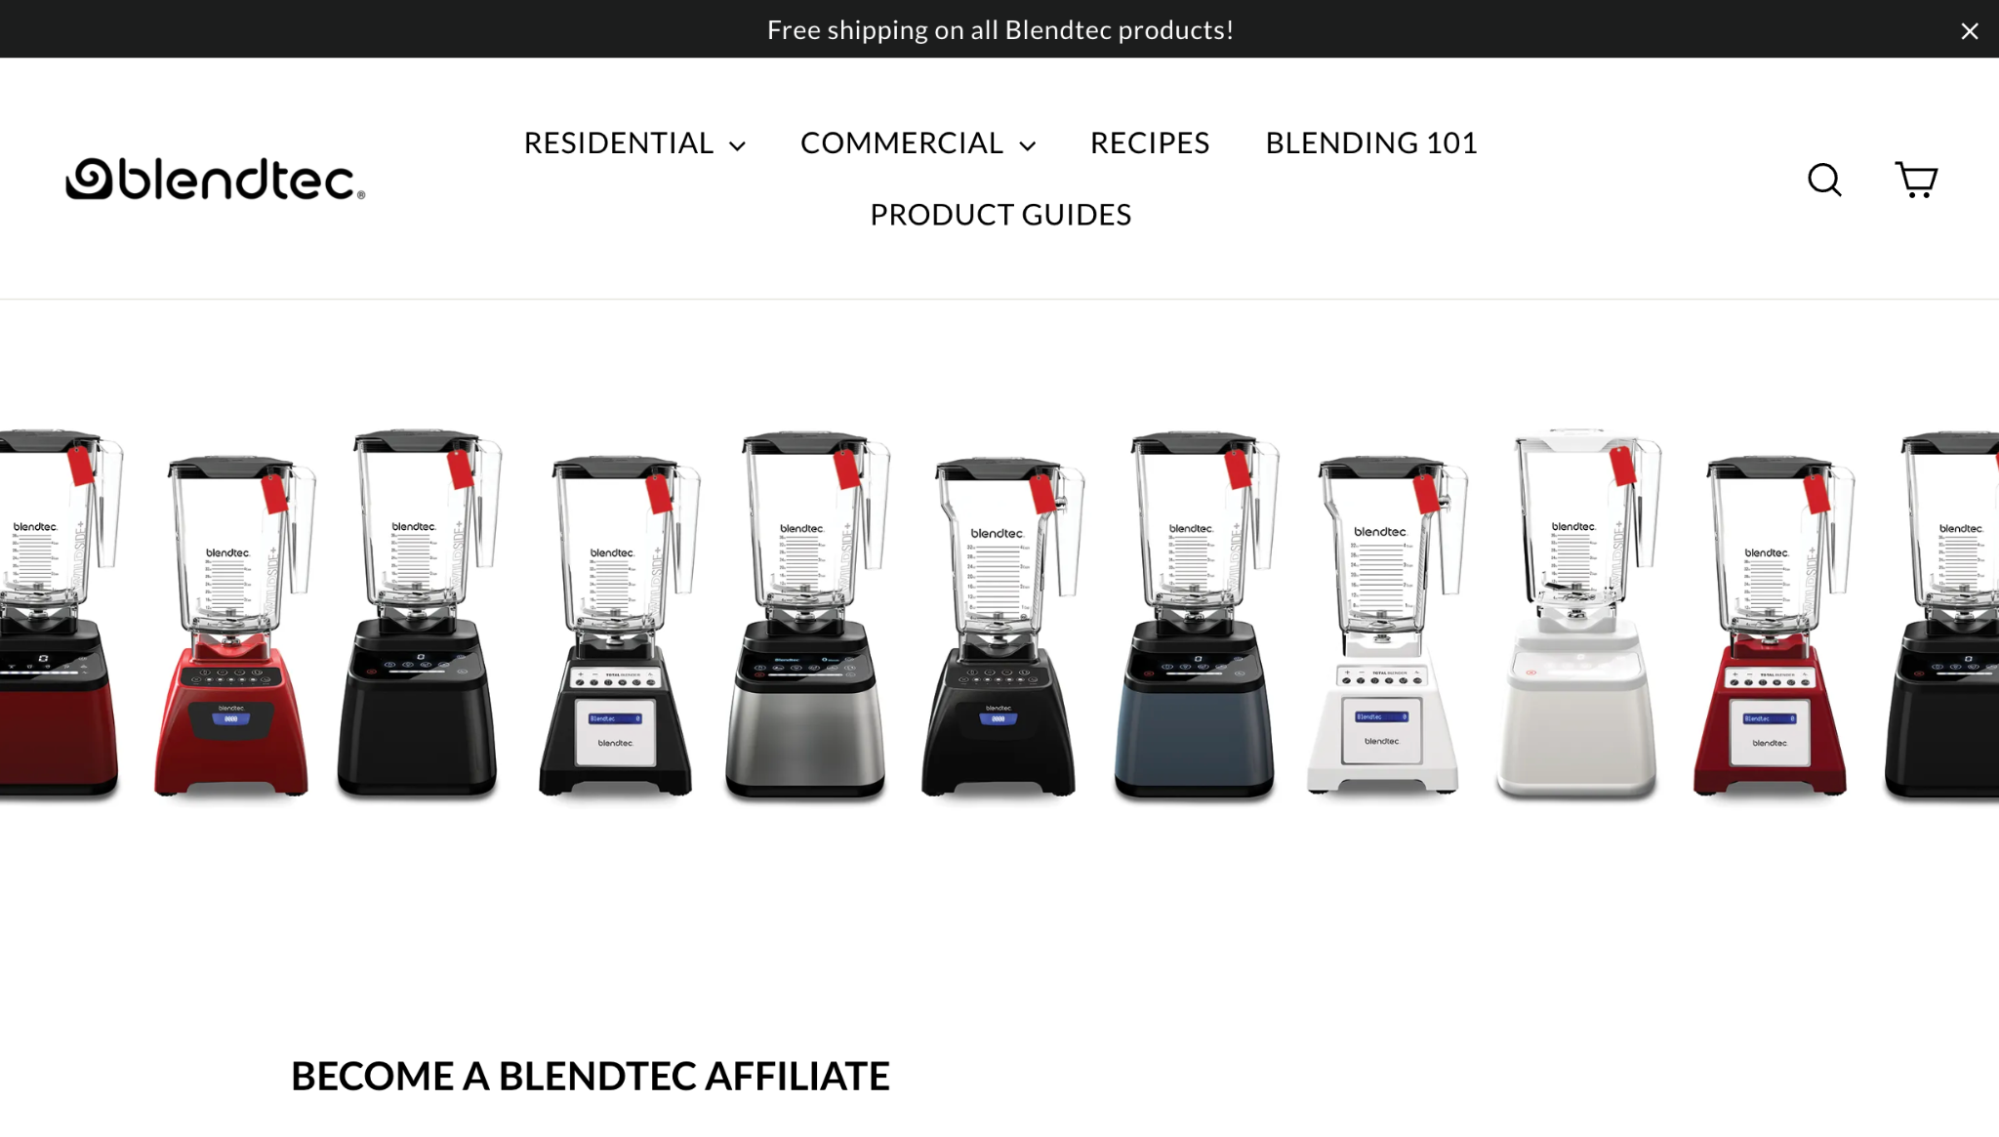 A screenshot of the Blendtec home page